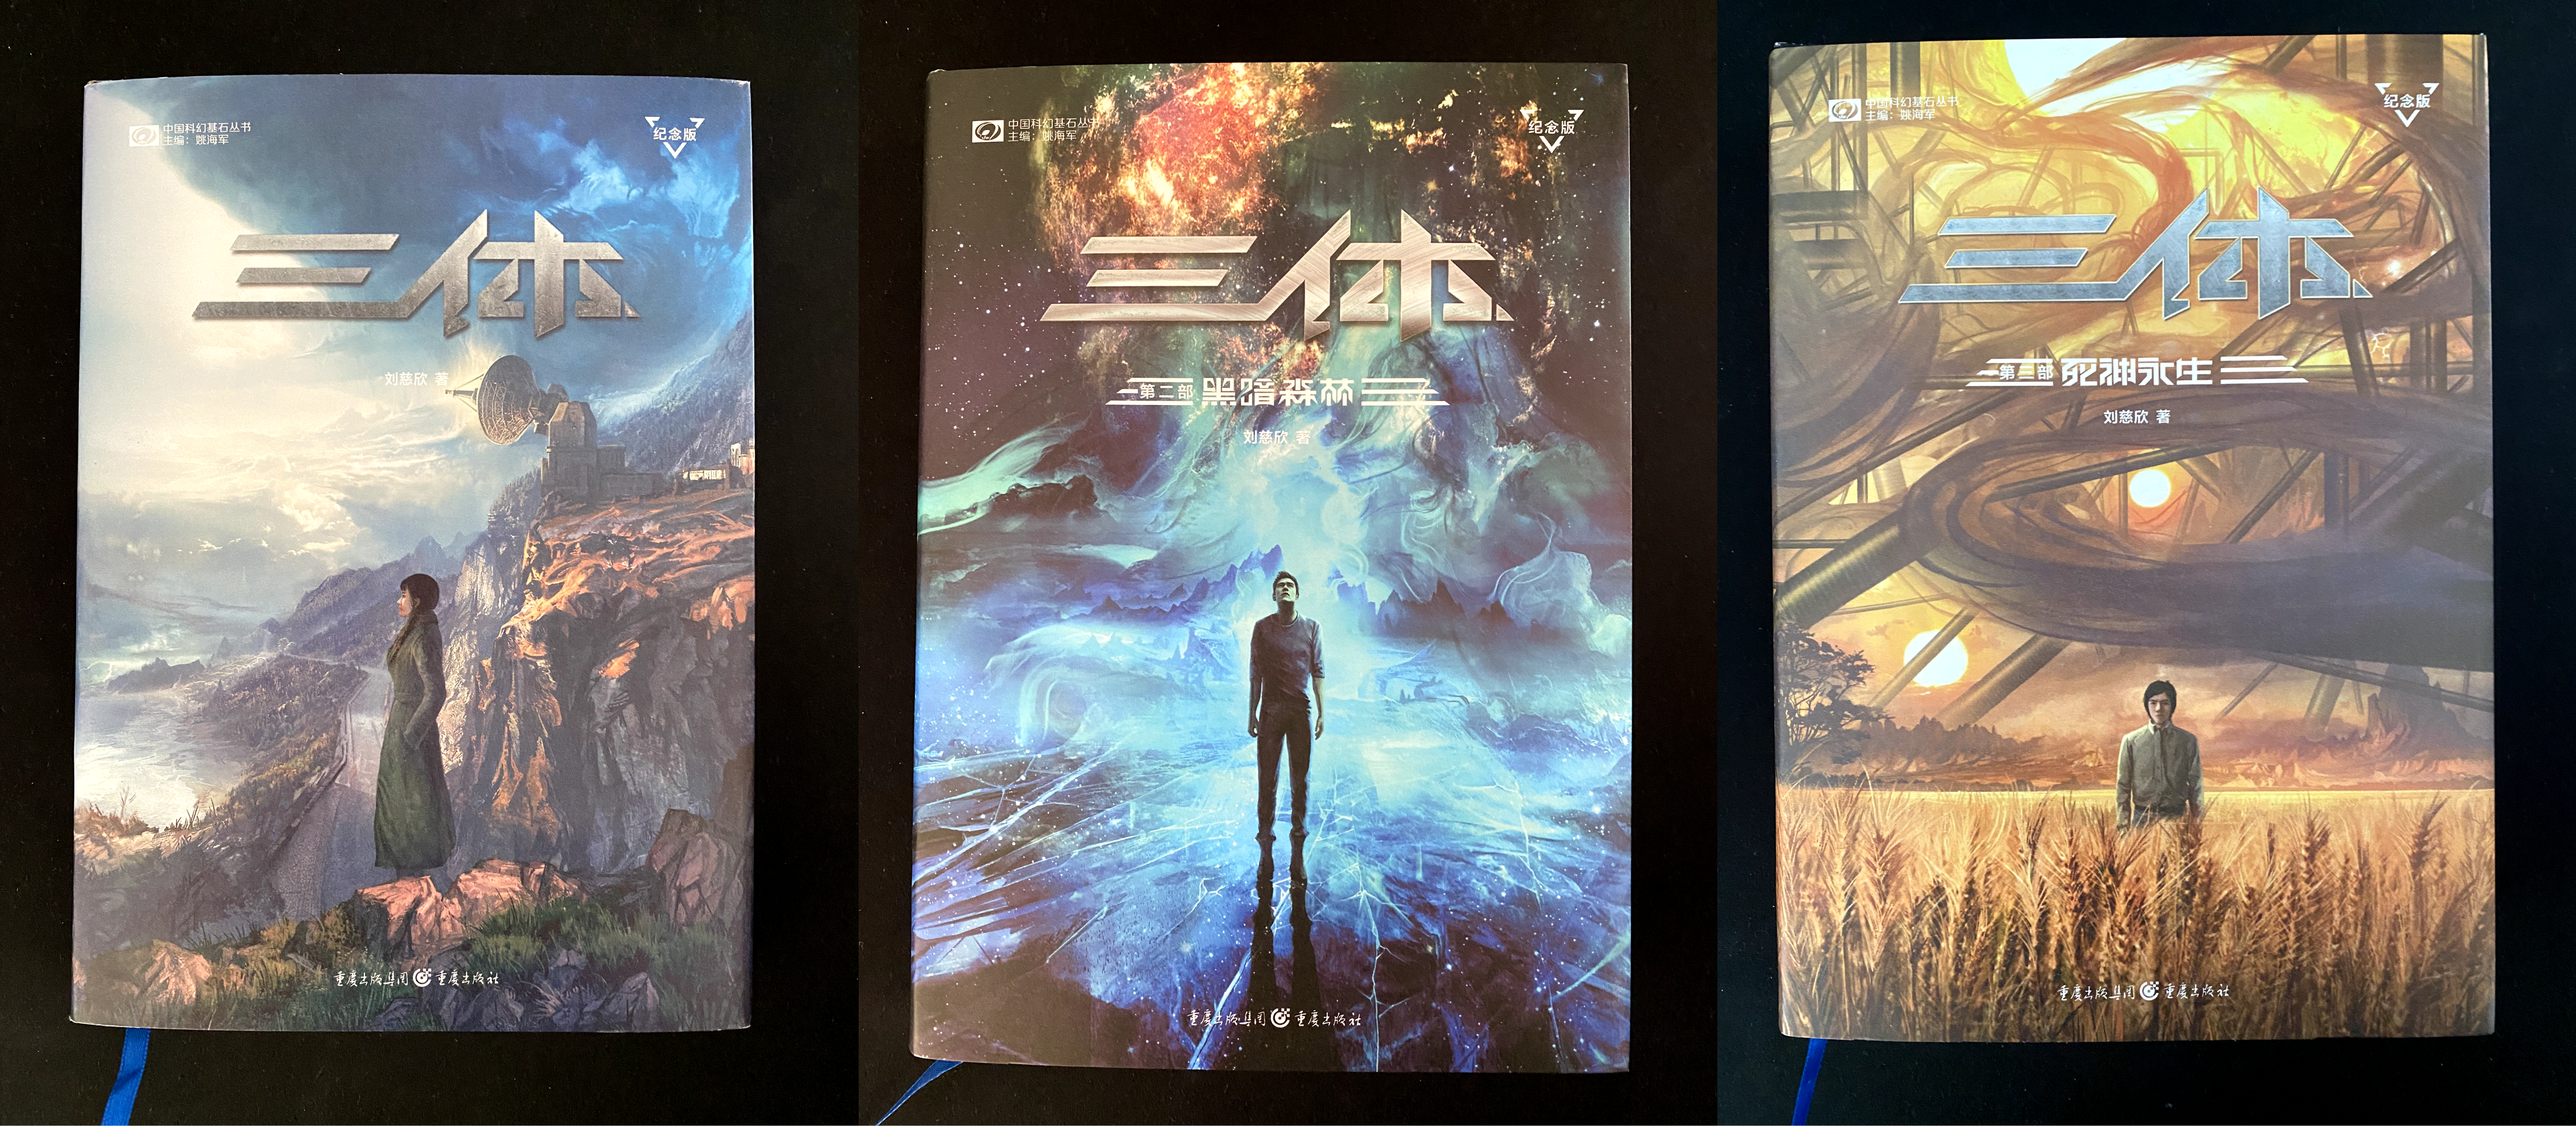 Images of Three Body Problem Book Series